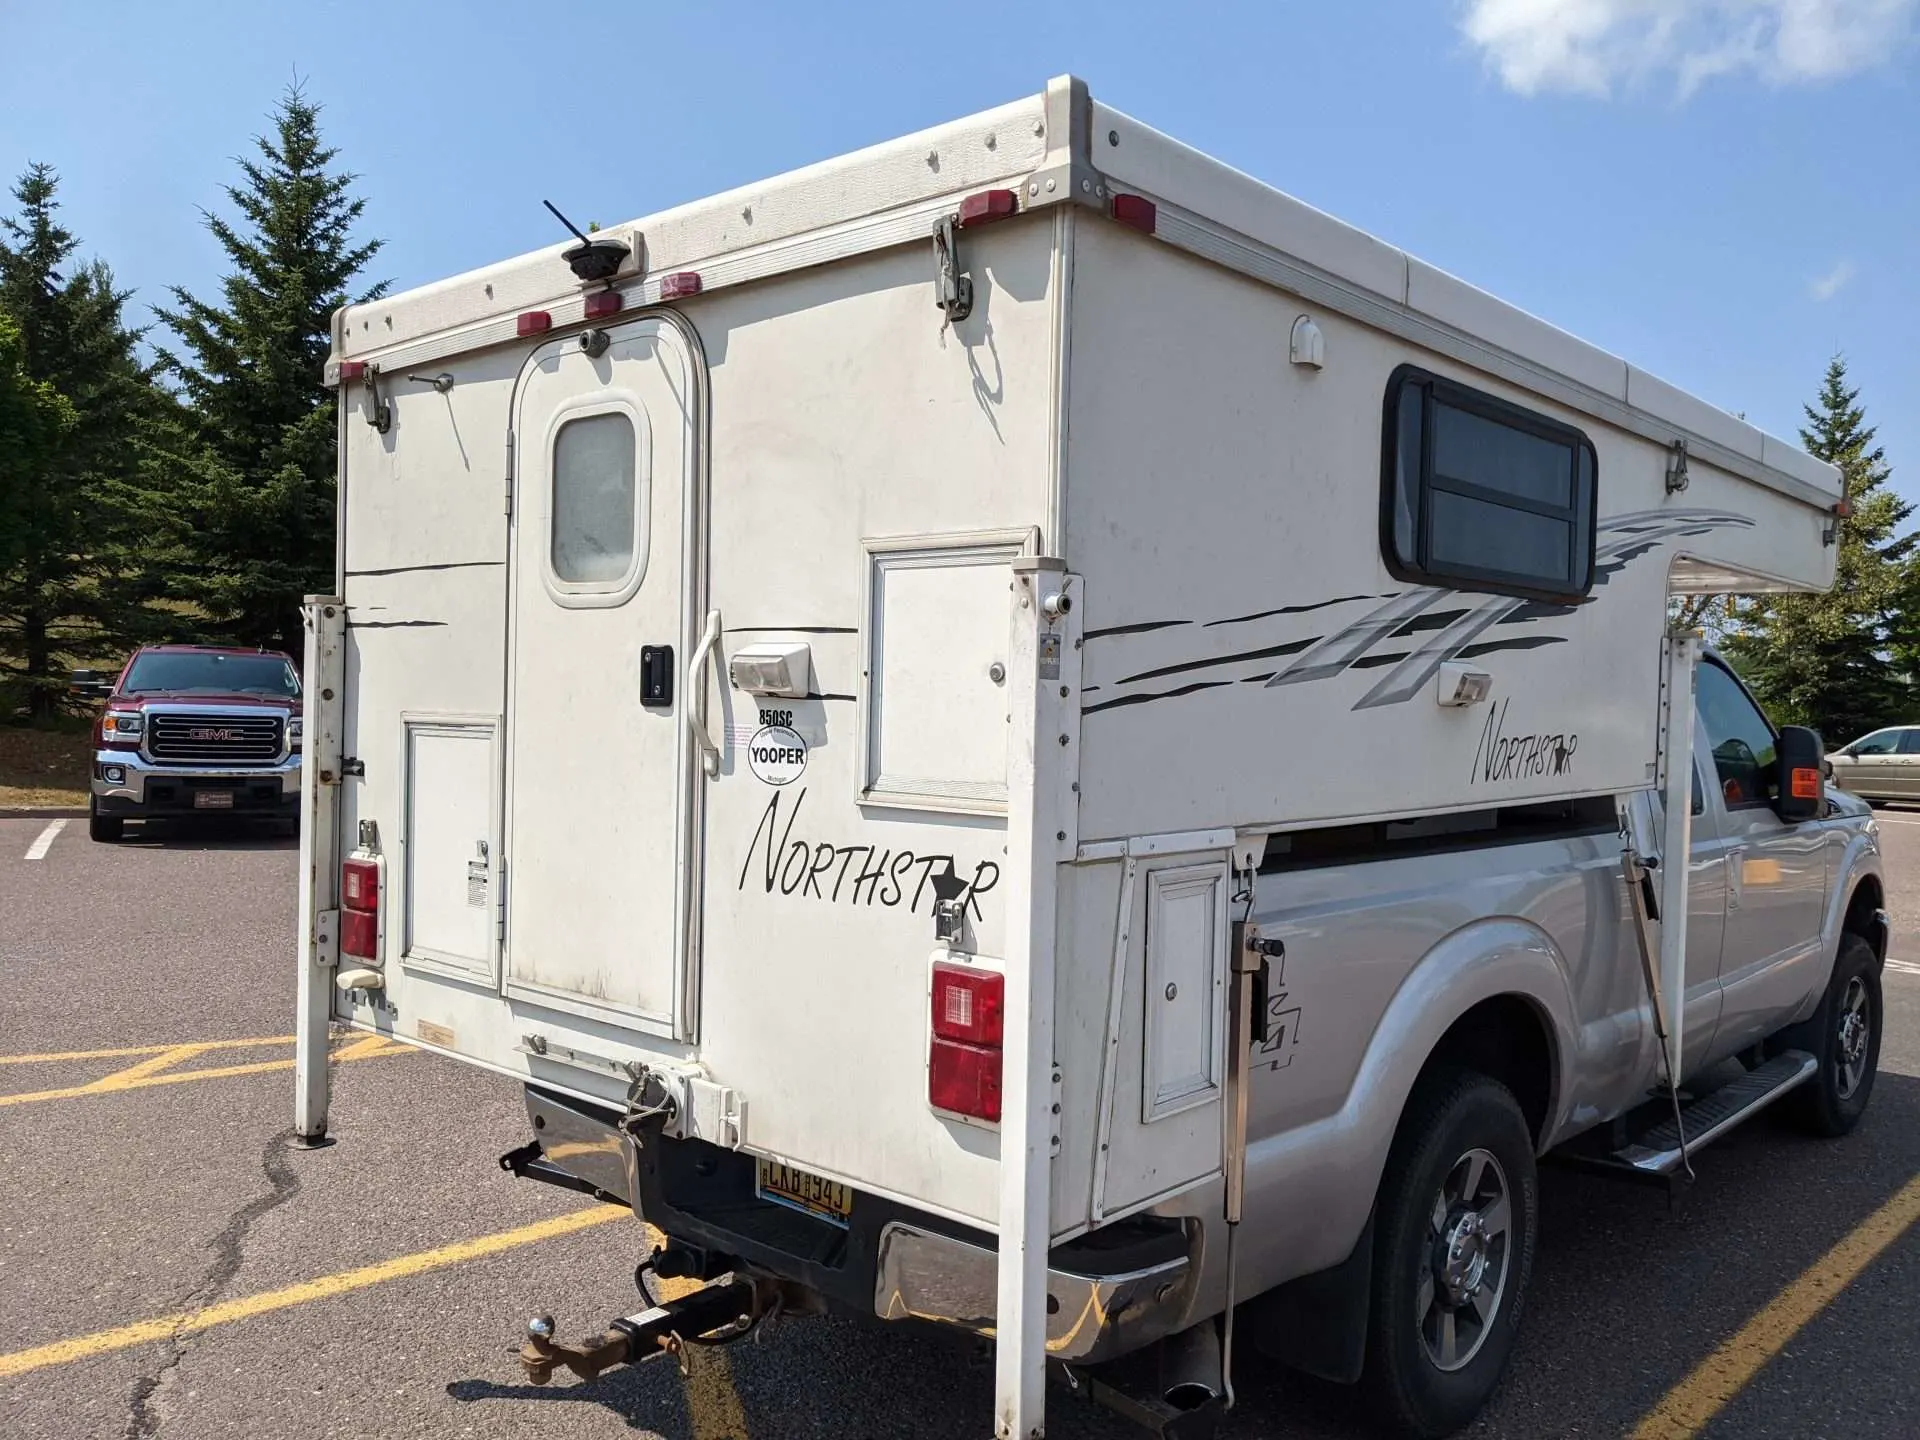 Northstar truck camper on a truck